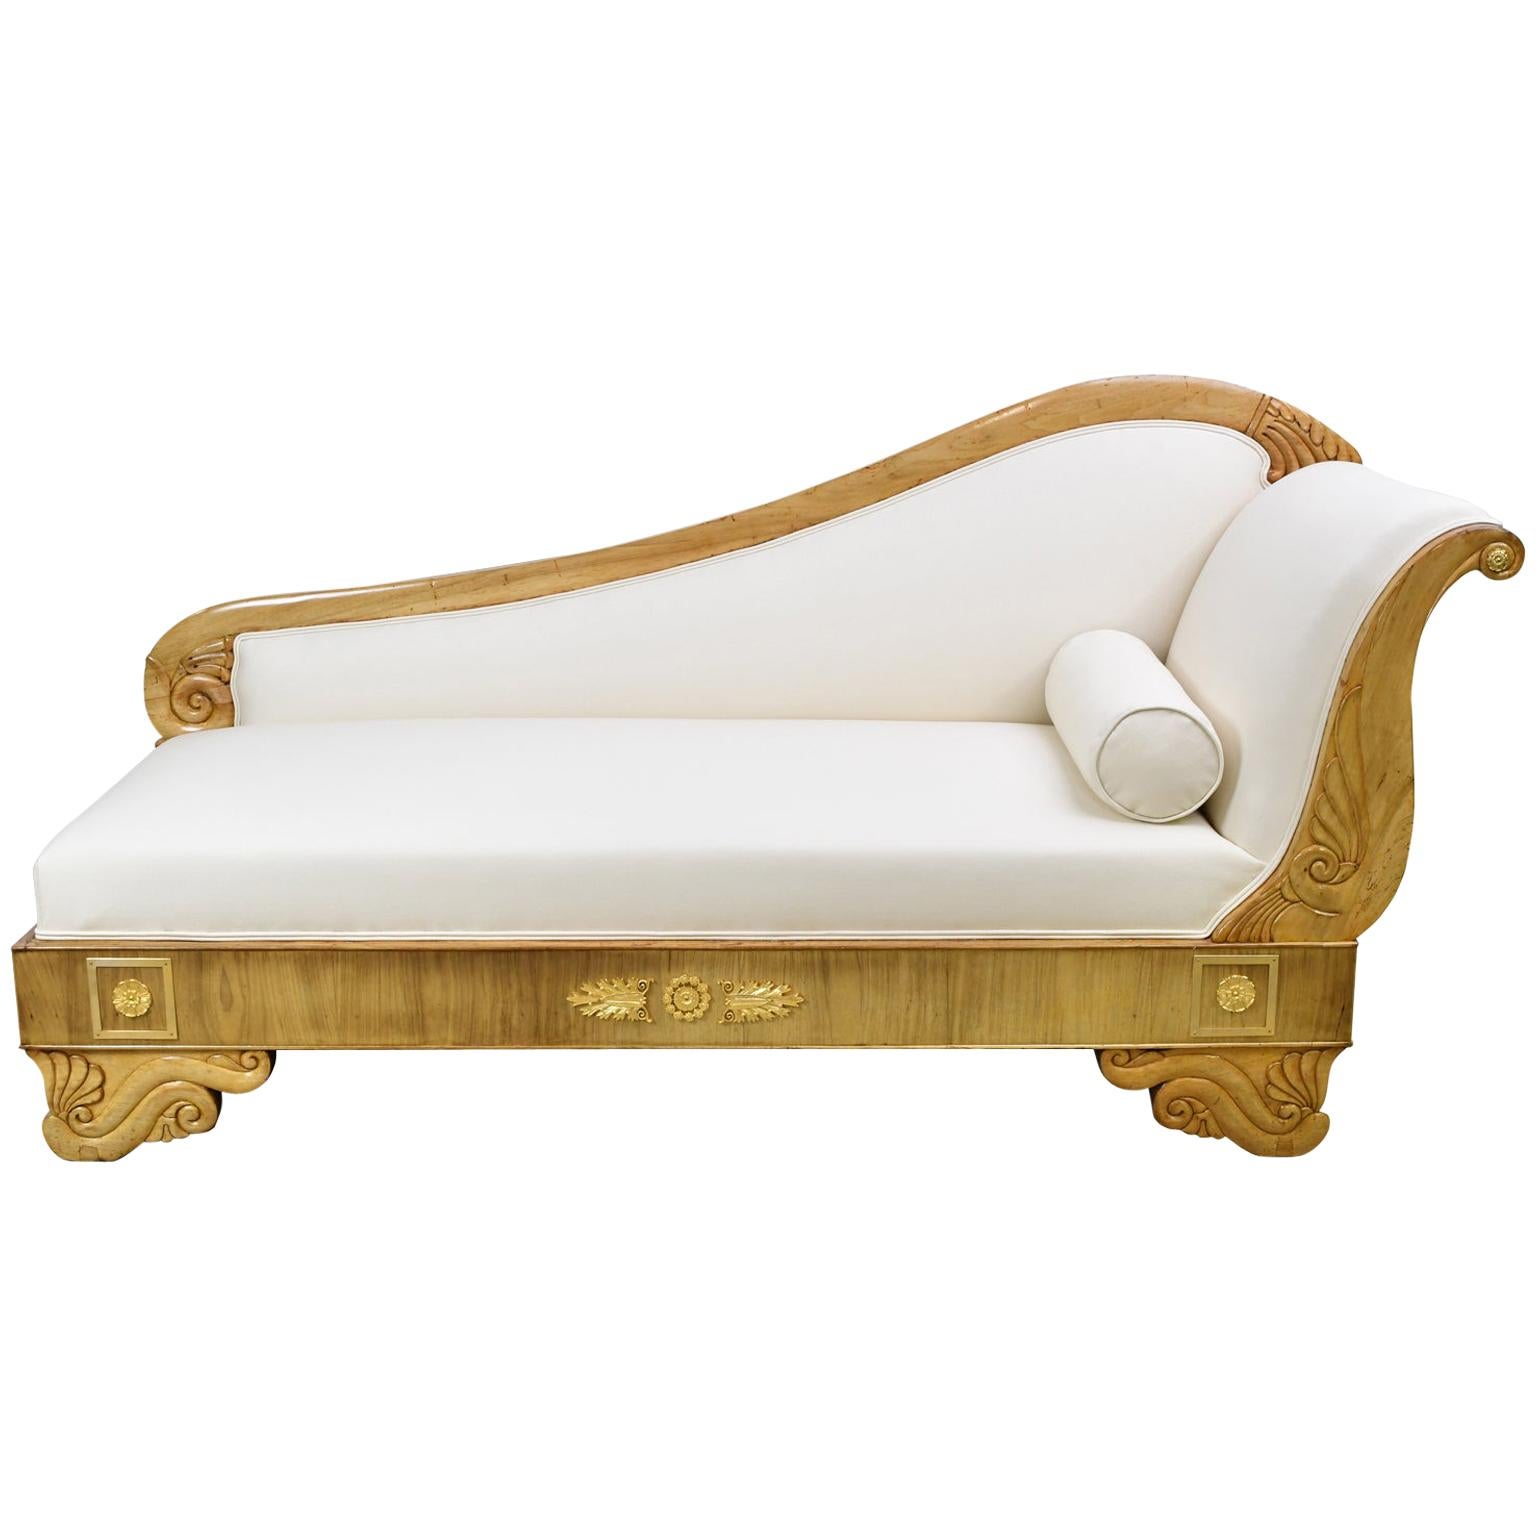 A Biedermeier Recamier or divan in light walnut with upholstery. Upholstered back starts low, rising to meet the scrolled side. Bronze d'ore ormolu mounts of foliate swags and rosettes decorate the bottom apron, Scandinavia, circa 1845.
This Divan